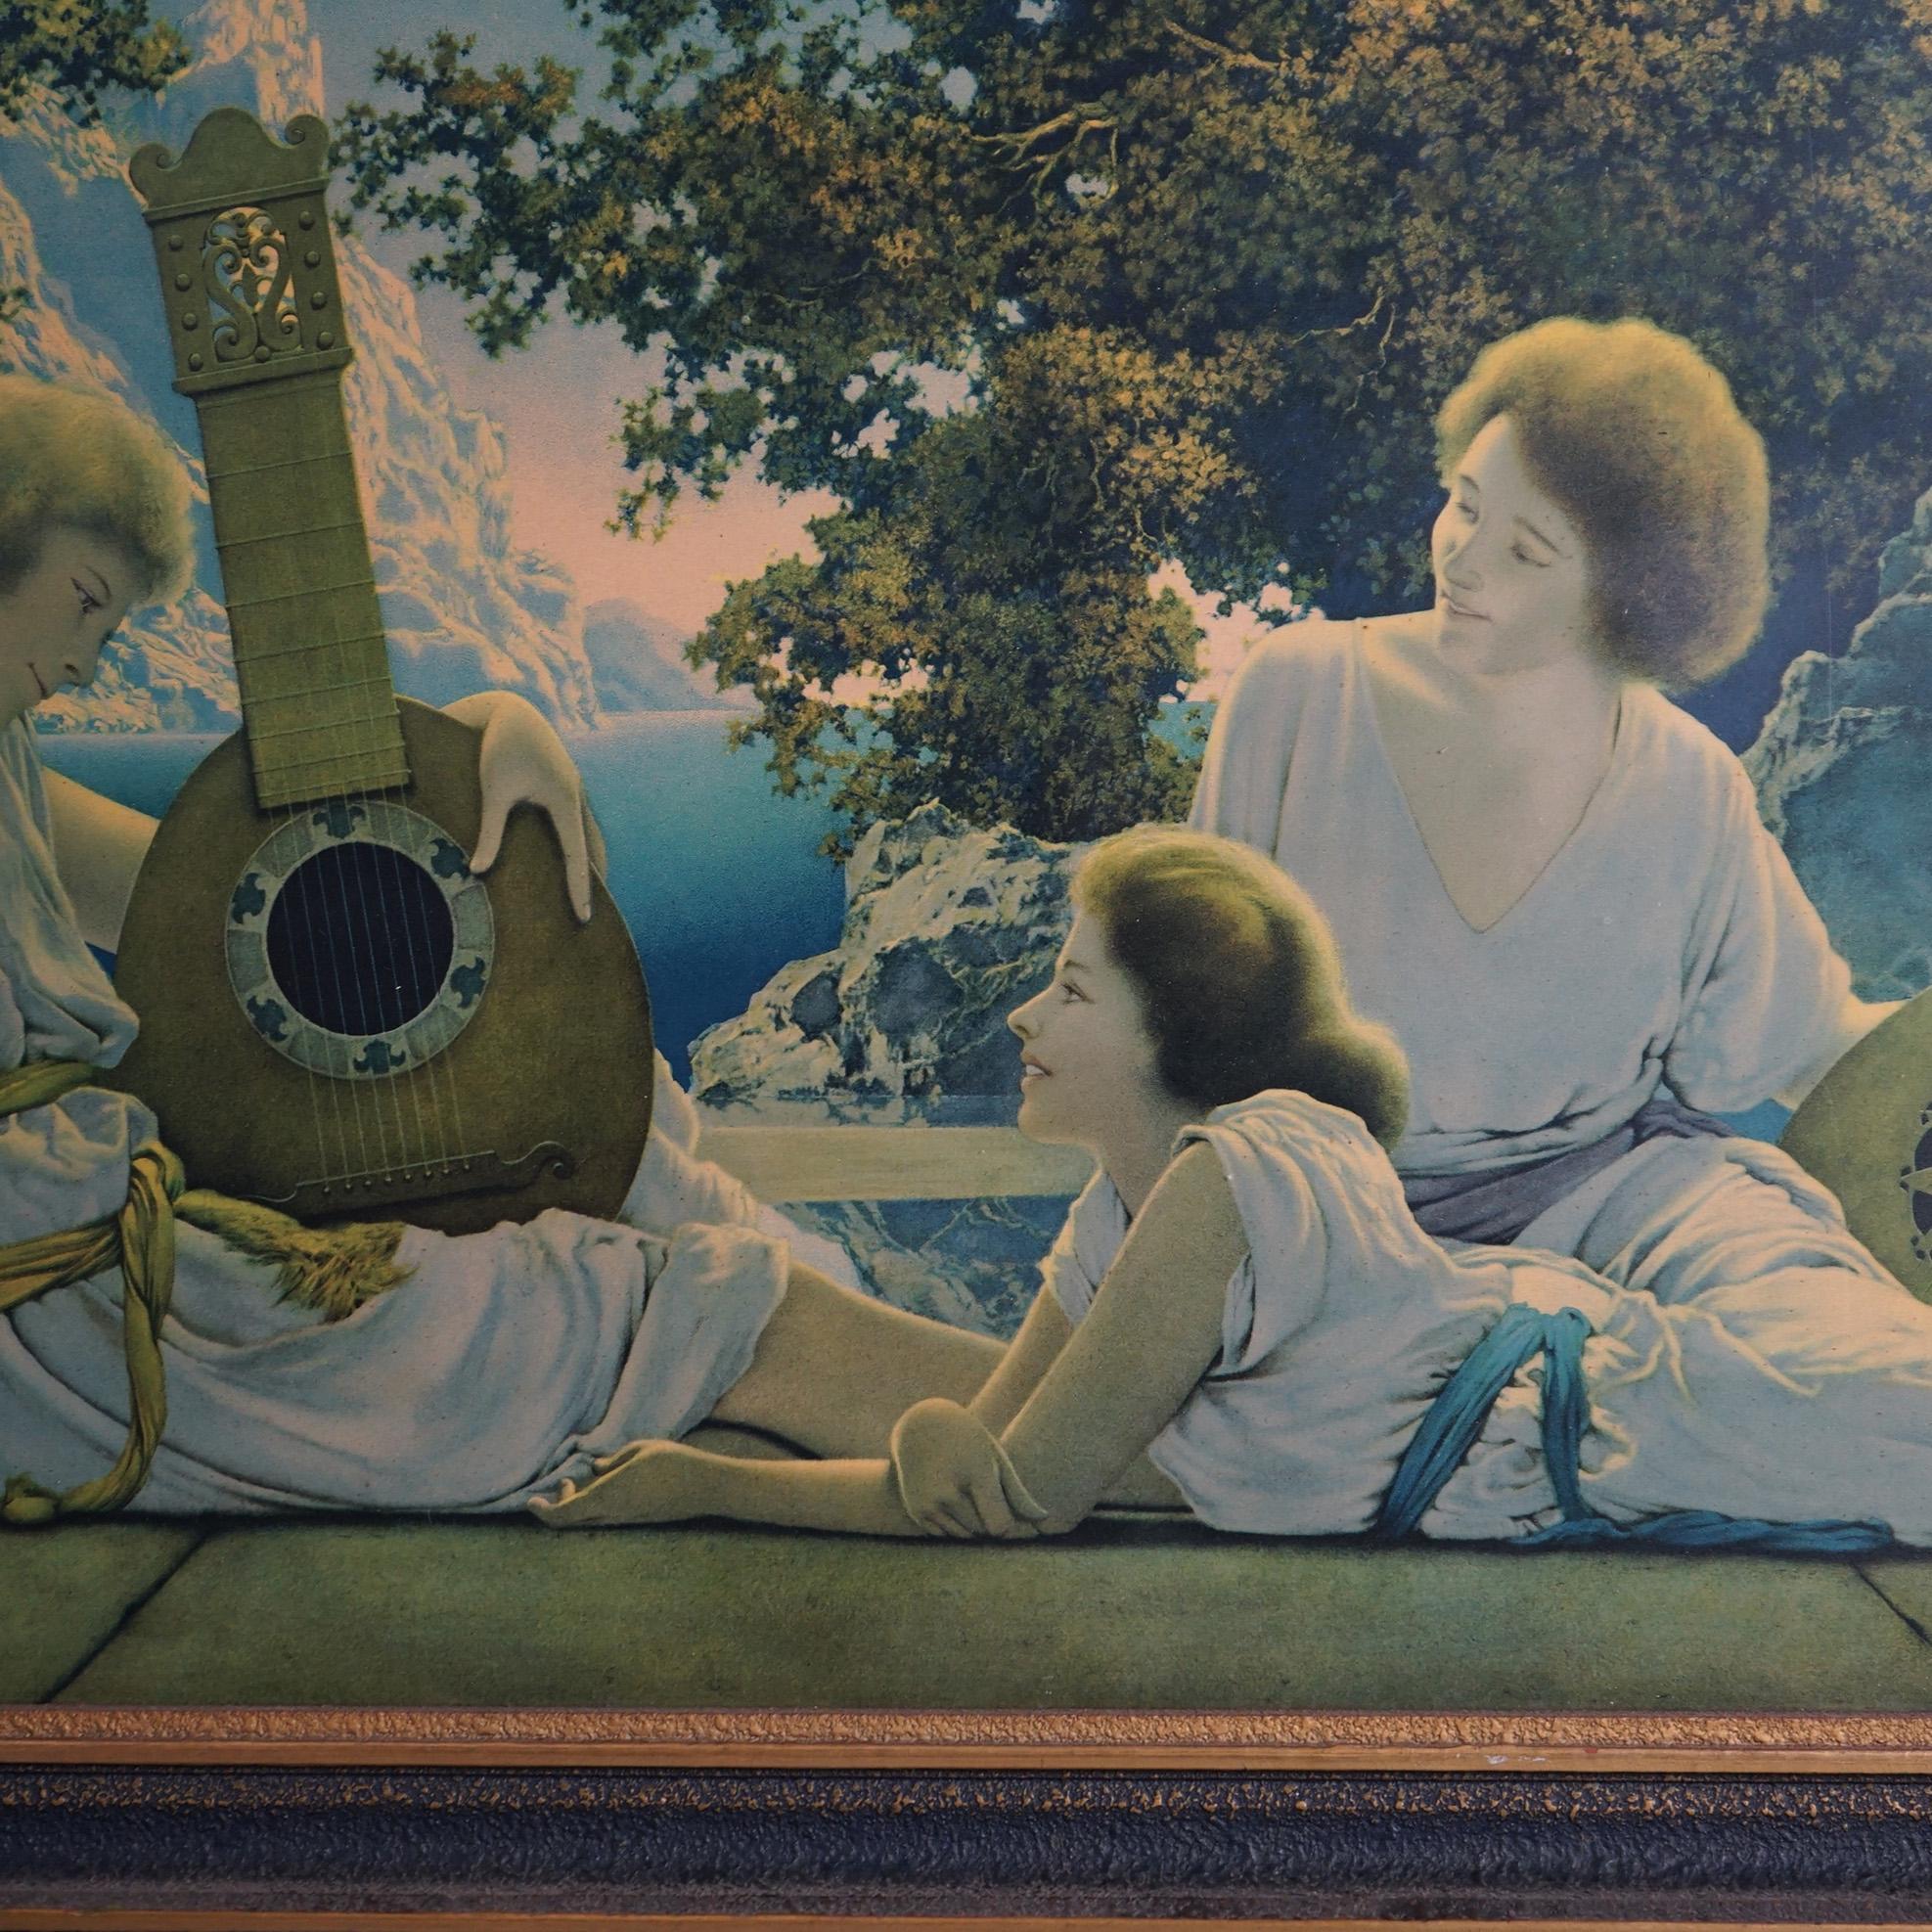 Large Maxfield Parrish Art Deco Print “The Lute Players”, Framed, C1920 For Sale 3